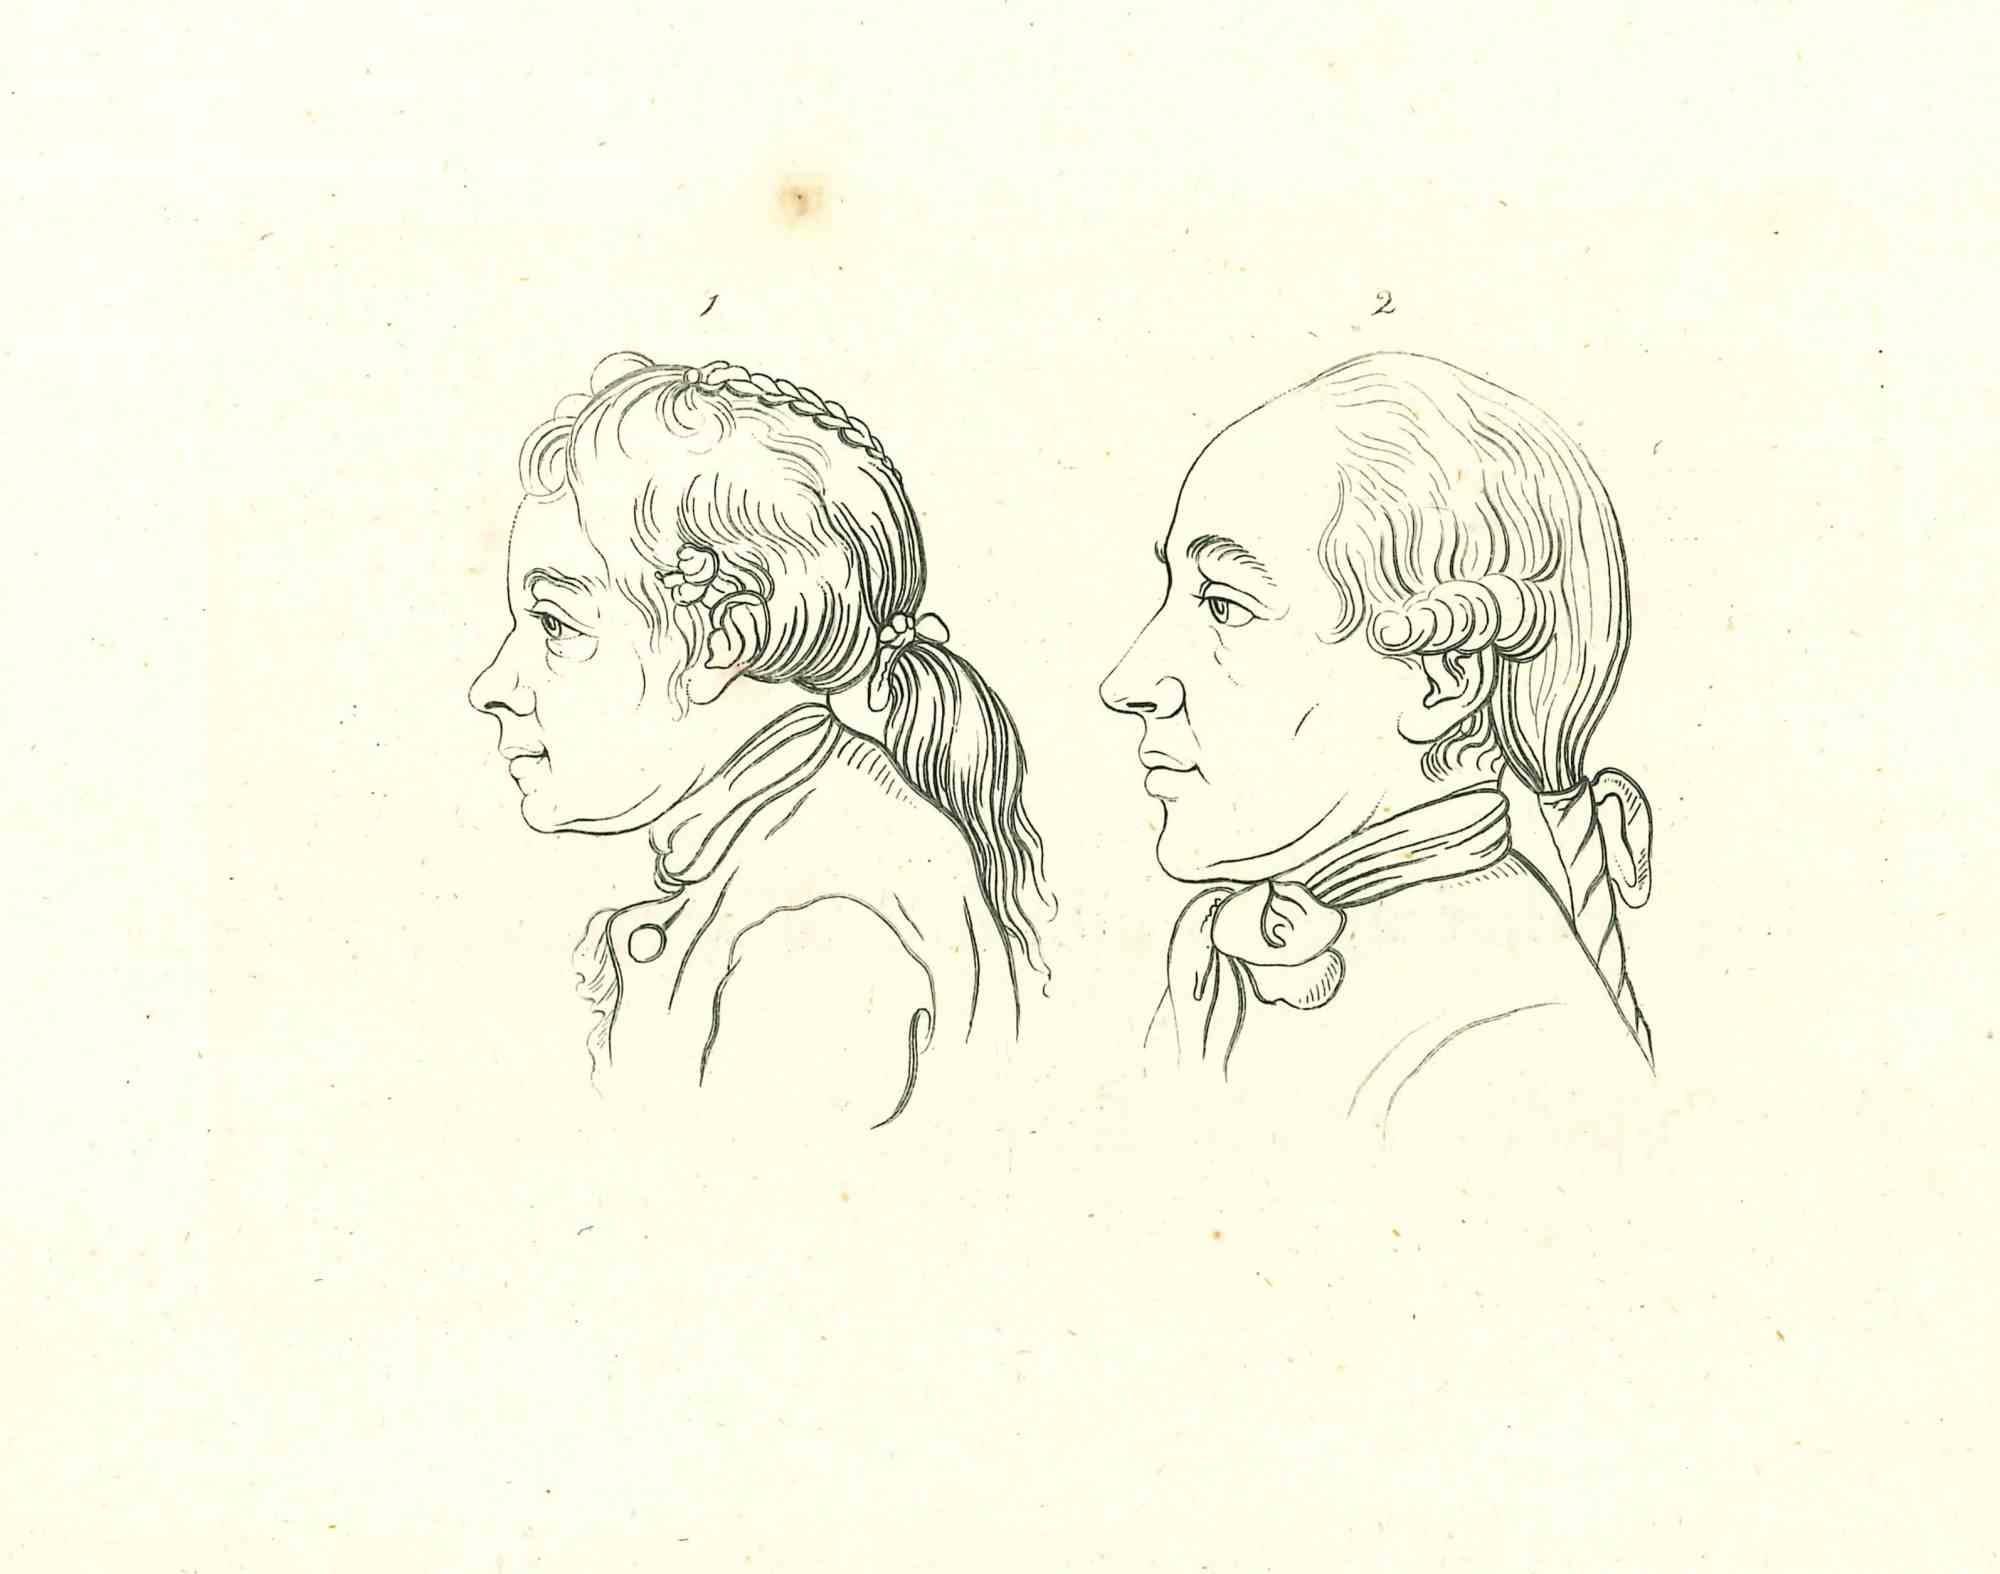 Portrait is an original artwork realized by Thomas Holloway (1748 - 1827).

Original Etching from J.C. Lavater's "Essays on Physiognomy, Designed to promote the Knowledge and the Love of Mankind", London, Bensley, 1810. 

This artwork portrays two